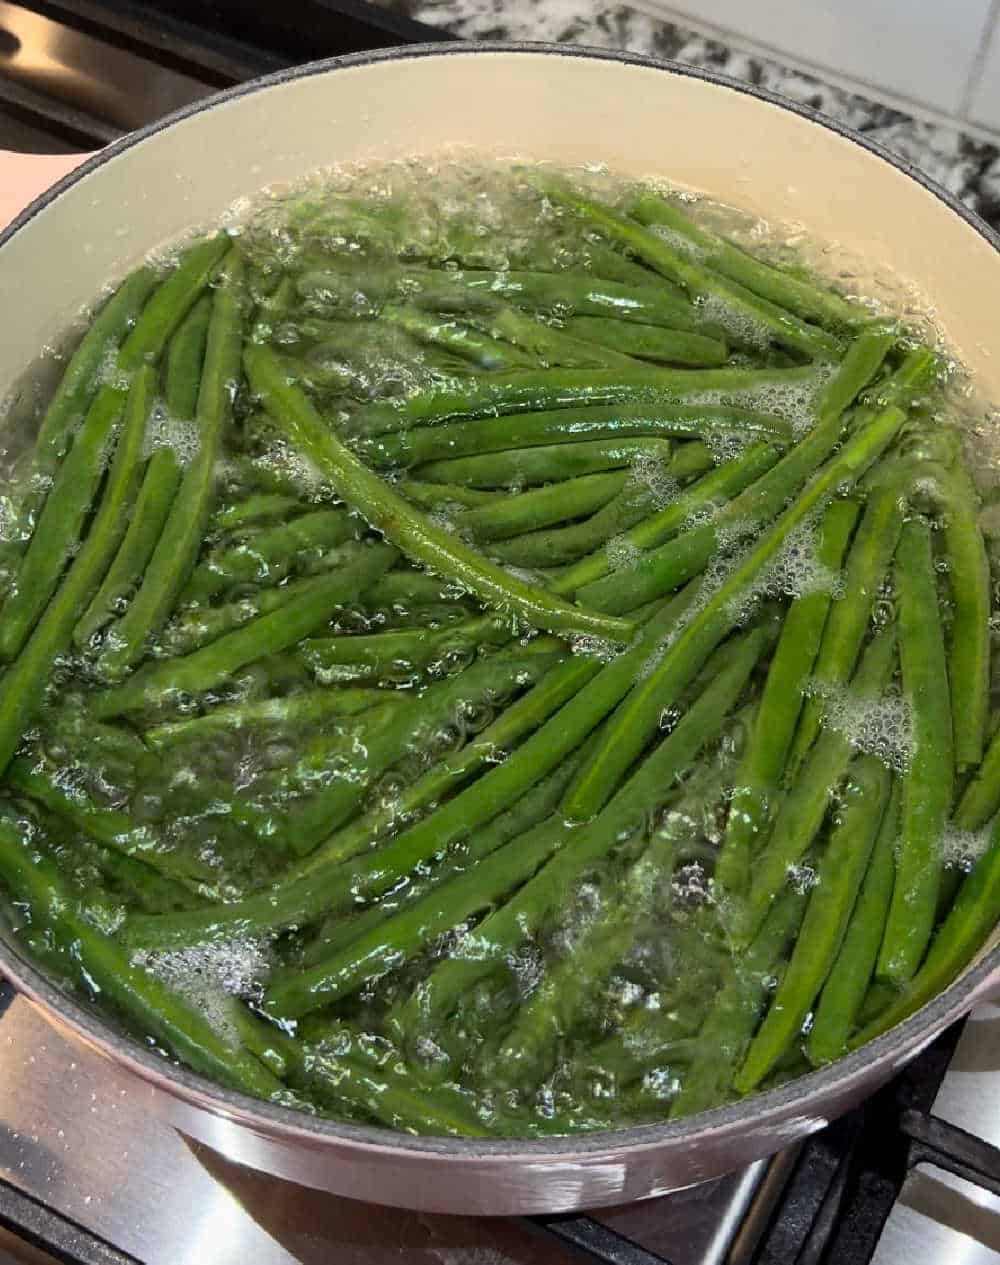 blanche fresh green beans on stove.